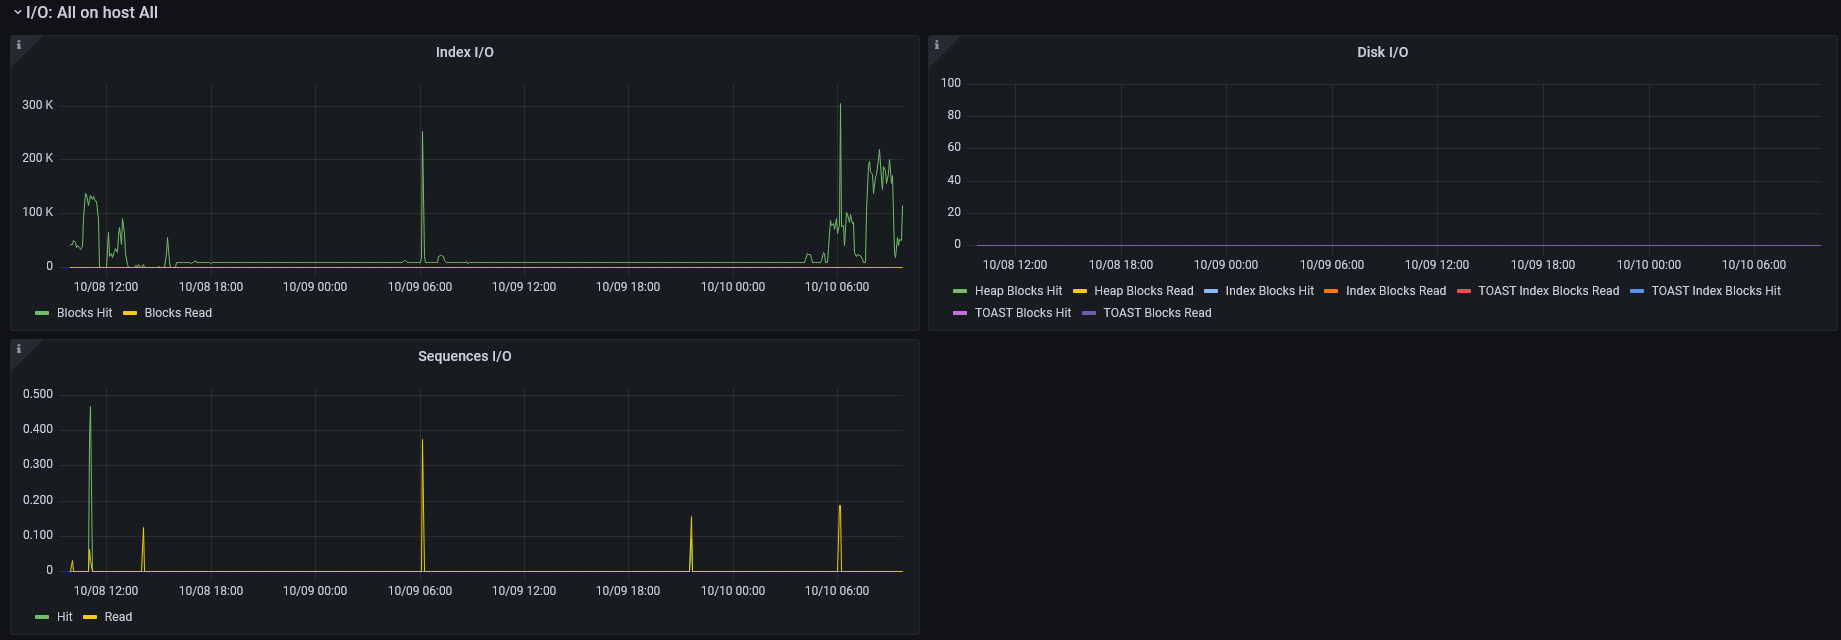 https://raw.githubusercontent.com/post-luxembourg/pgflux/v1.0.0.post4/docs/_images/grafana-dashboard-03.png